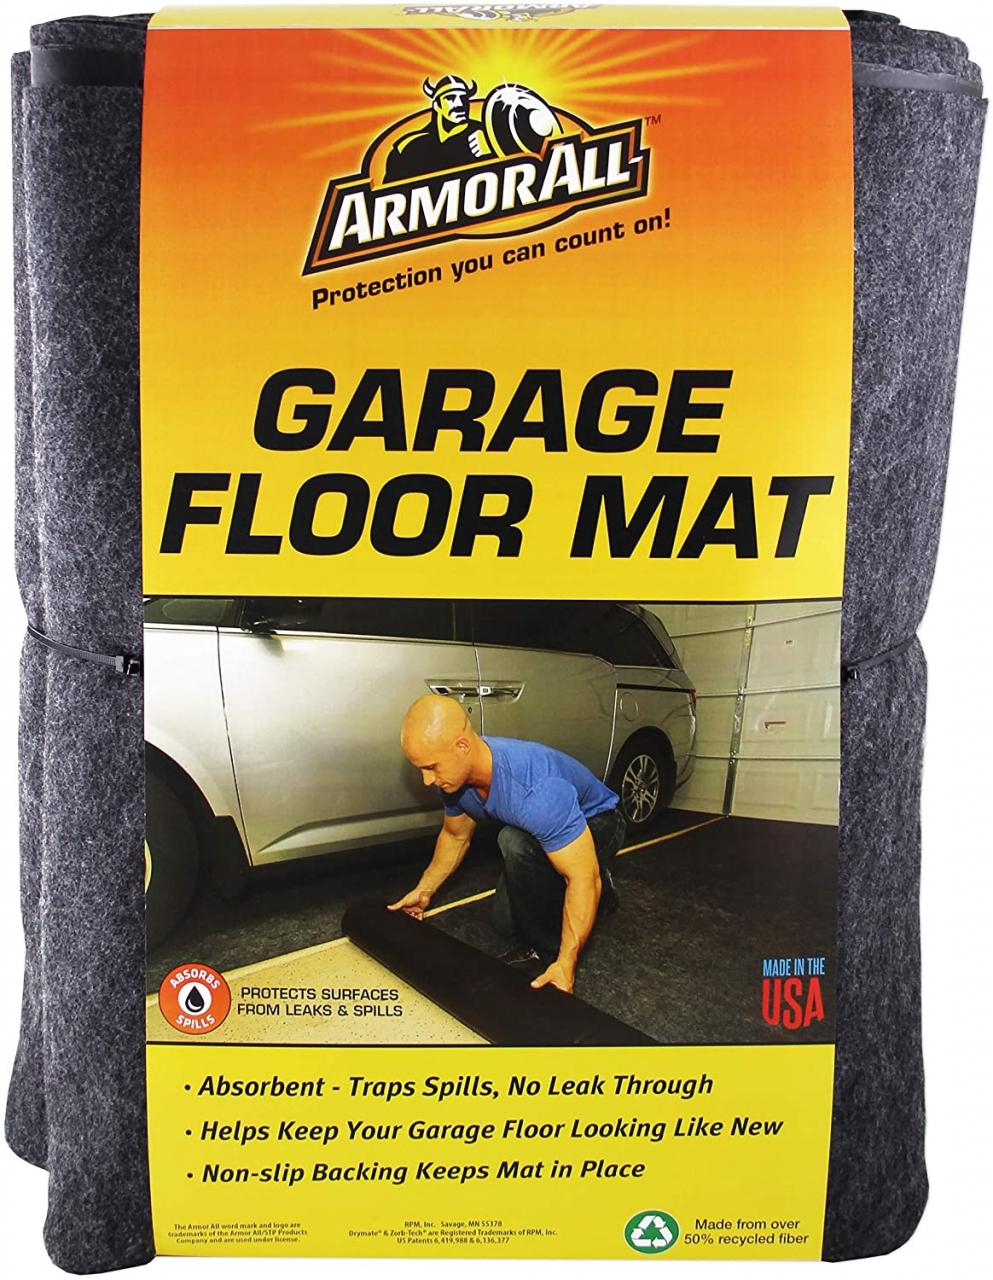 5 Best Garage Floor Mats And Why You Should Use One